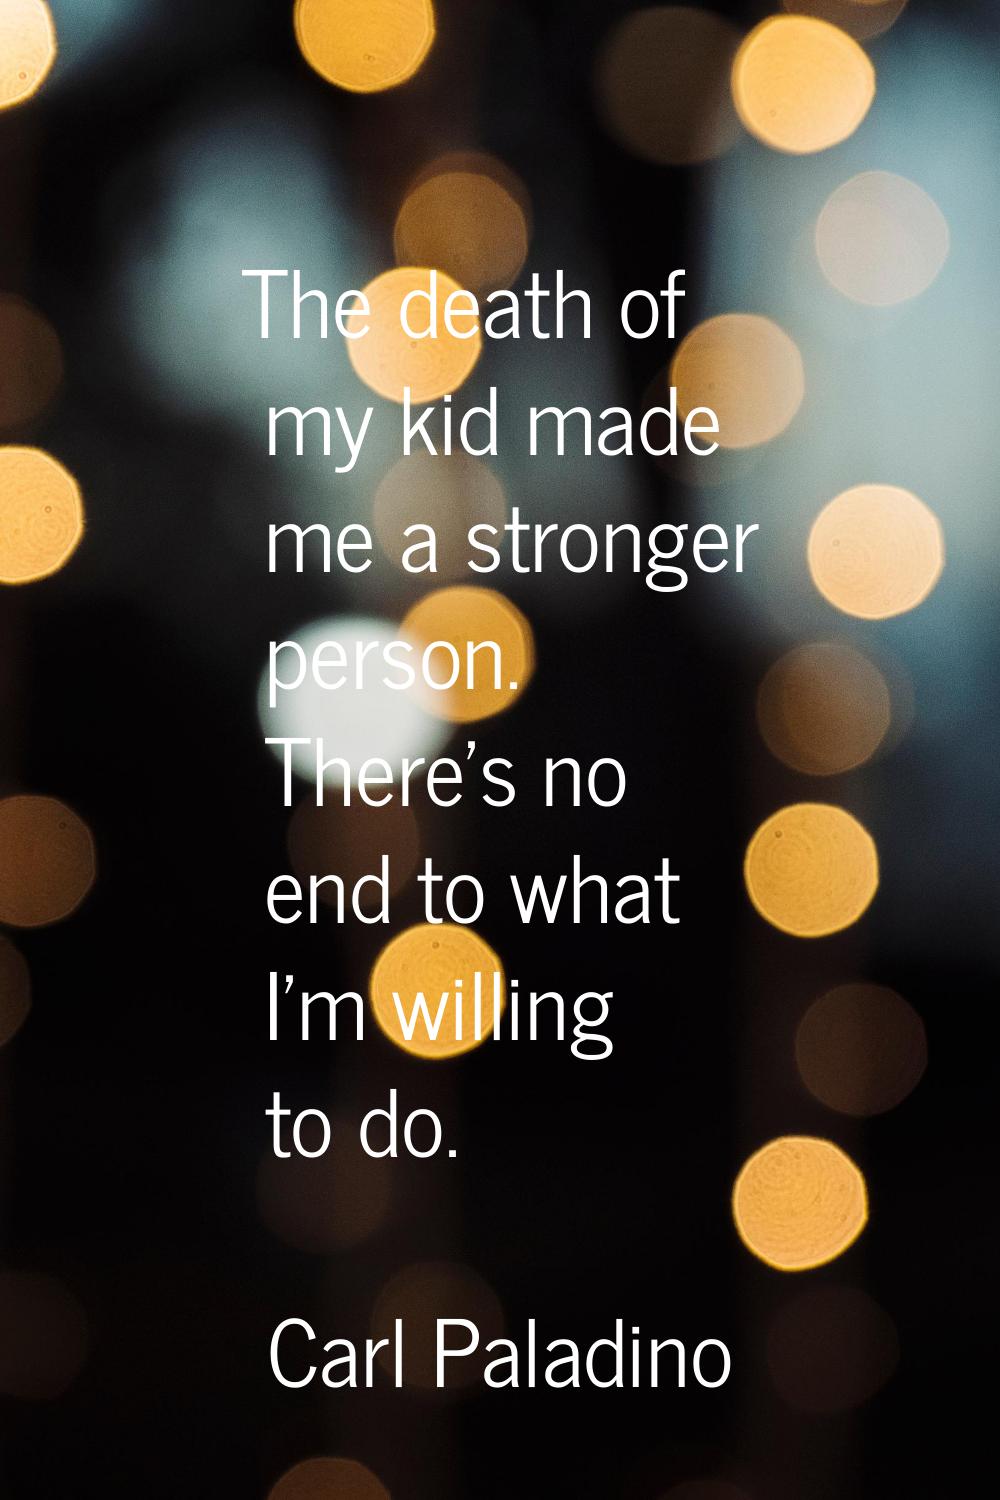 The death of my kid made me a stronger person. There's no end to what I'm willing to do.